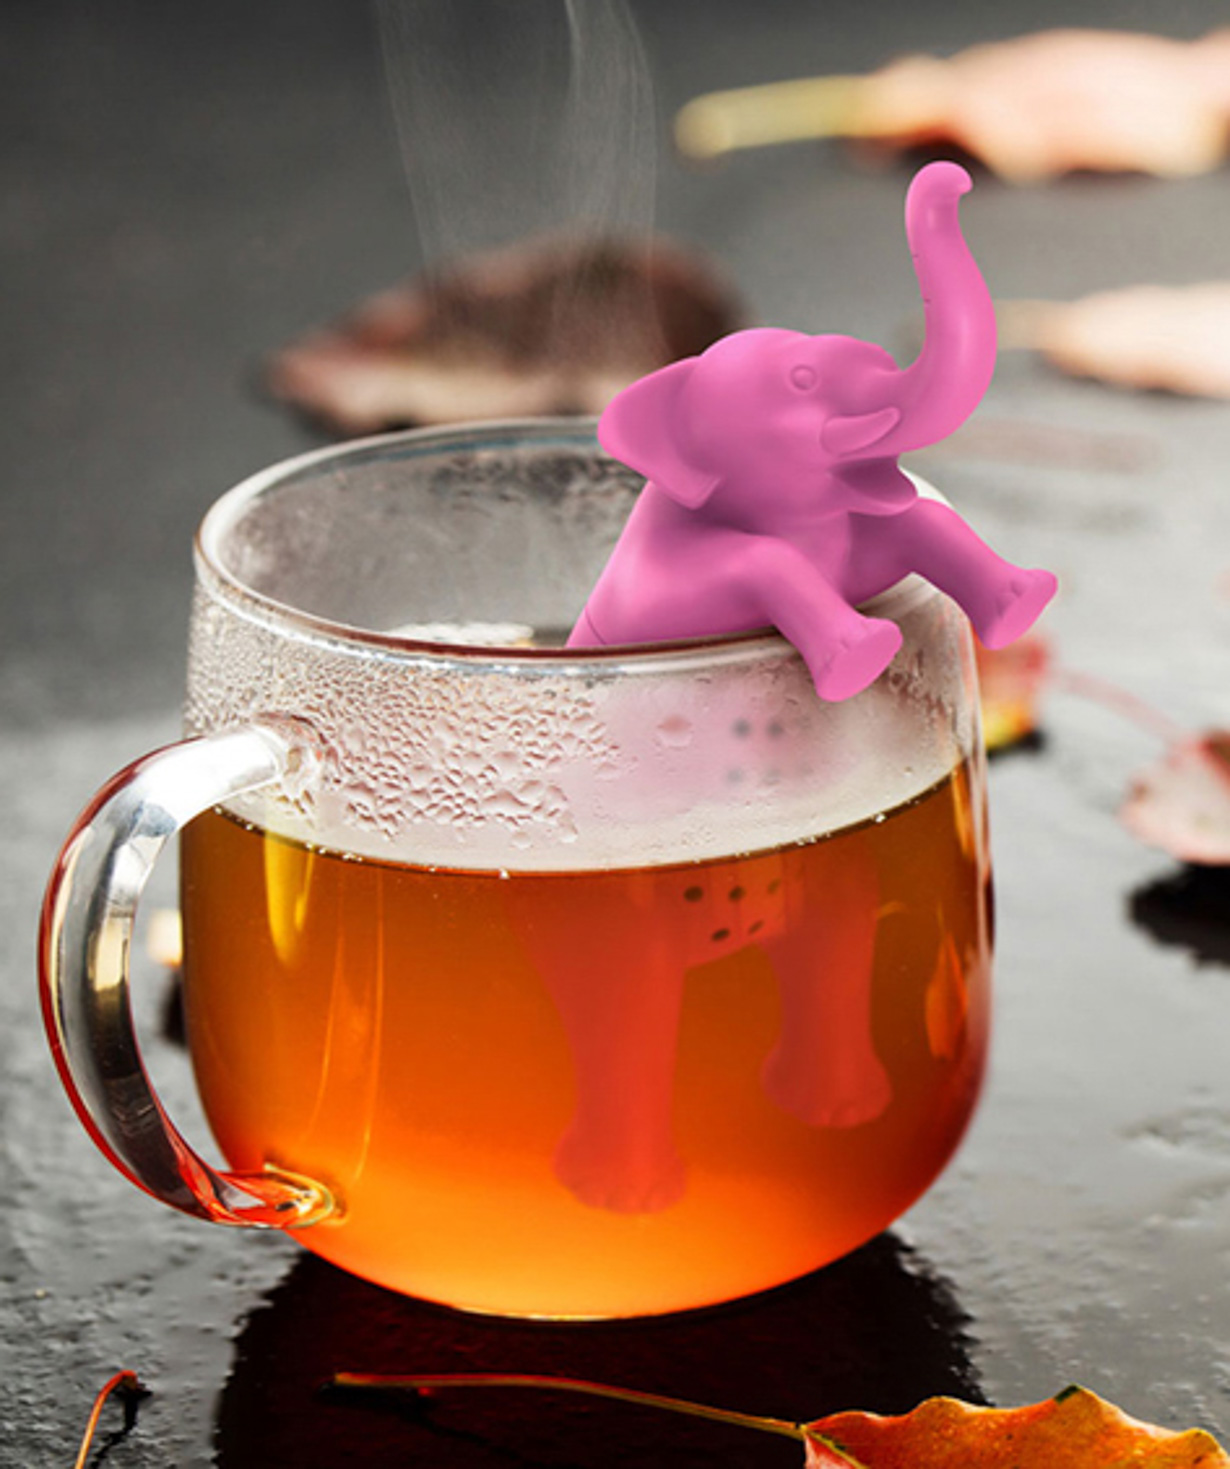 Infusion `Creative Gifts` for tea elephant